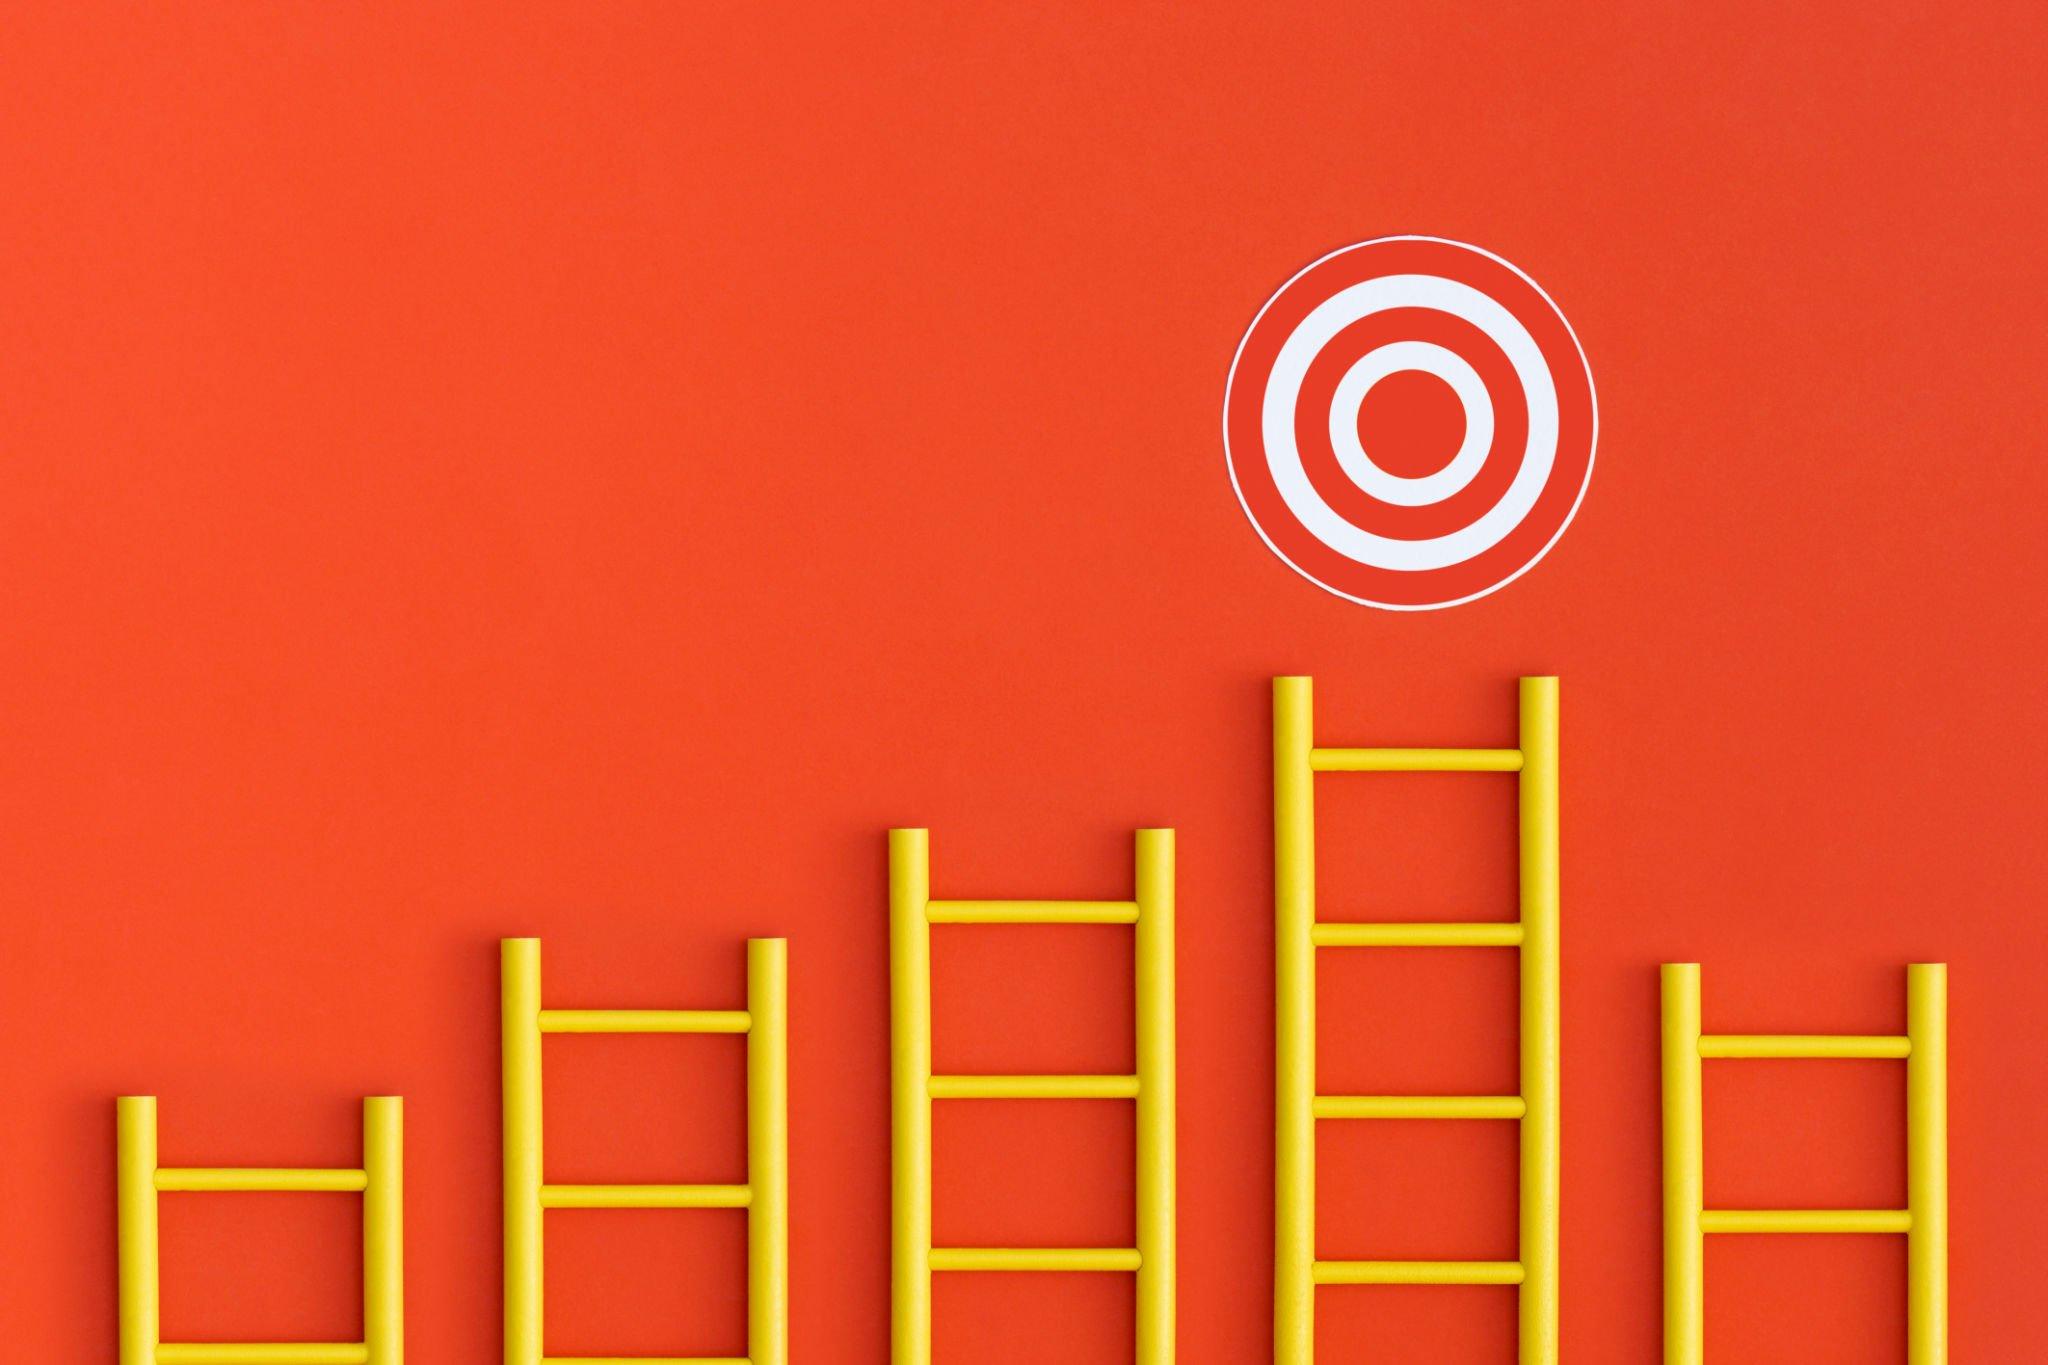  How to strategize for targeted advertising